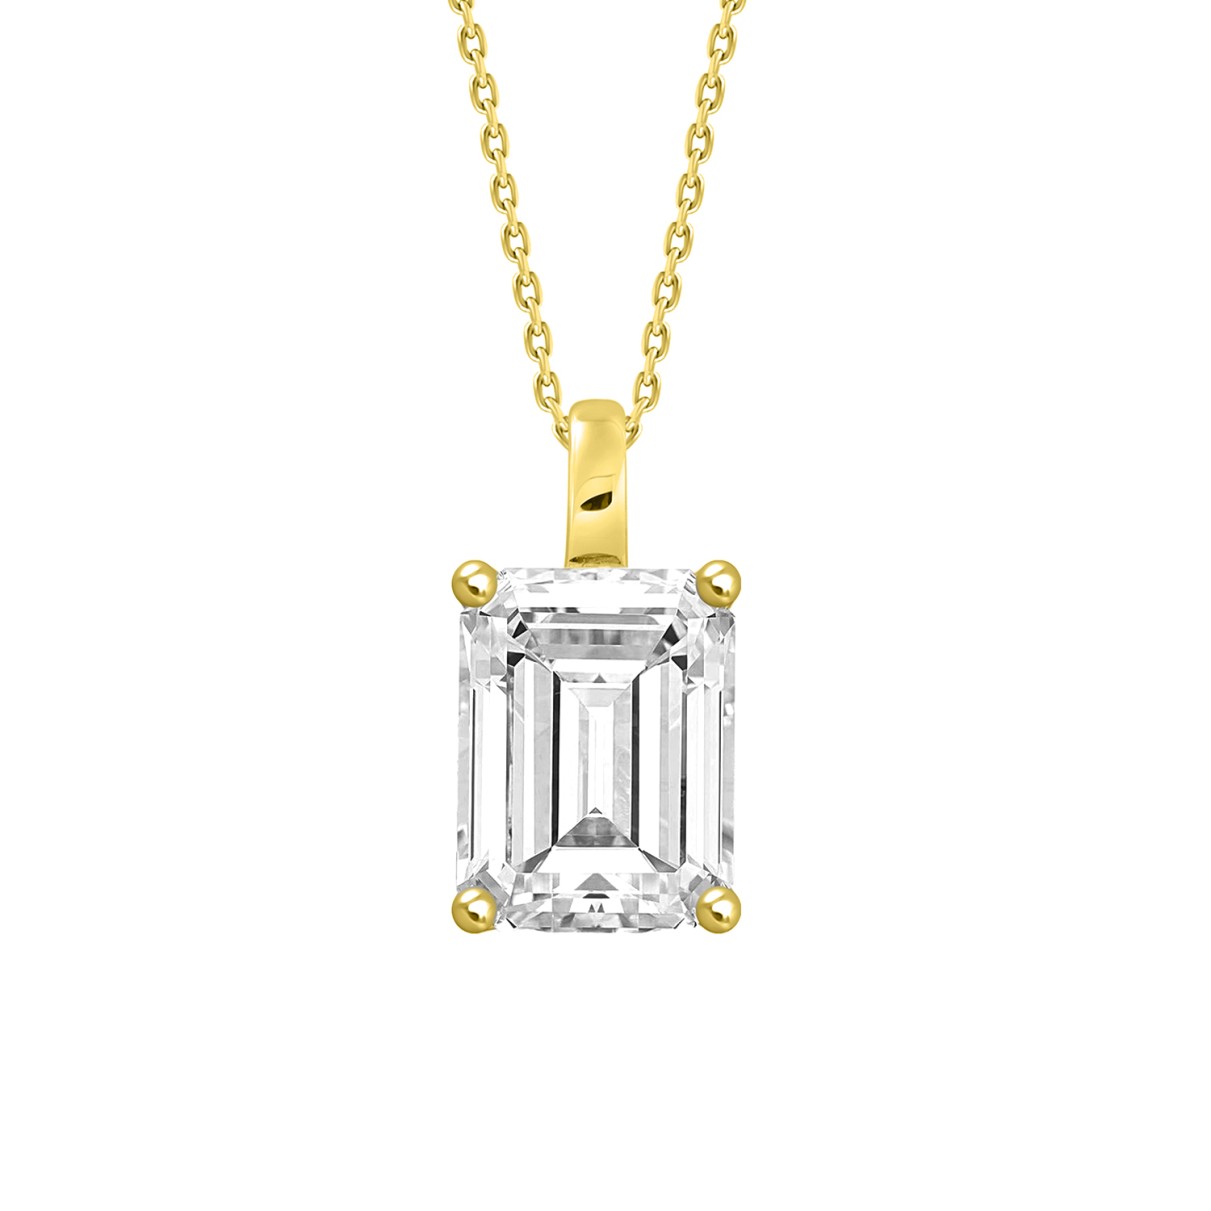 LADIES SOLITAIRE PENDANT WITH CHAIN 3CT EMERALD DIAMOND 14K YELLOW GOLD 